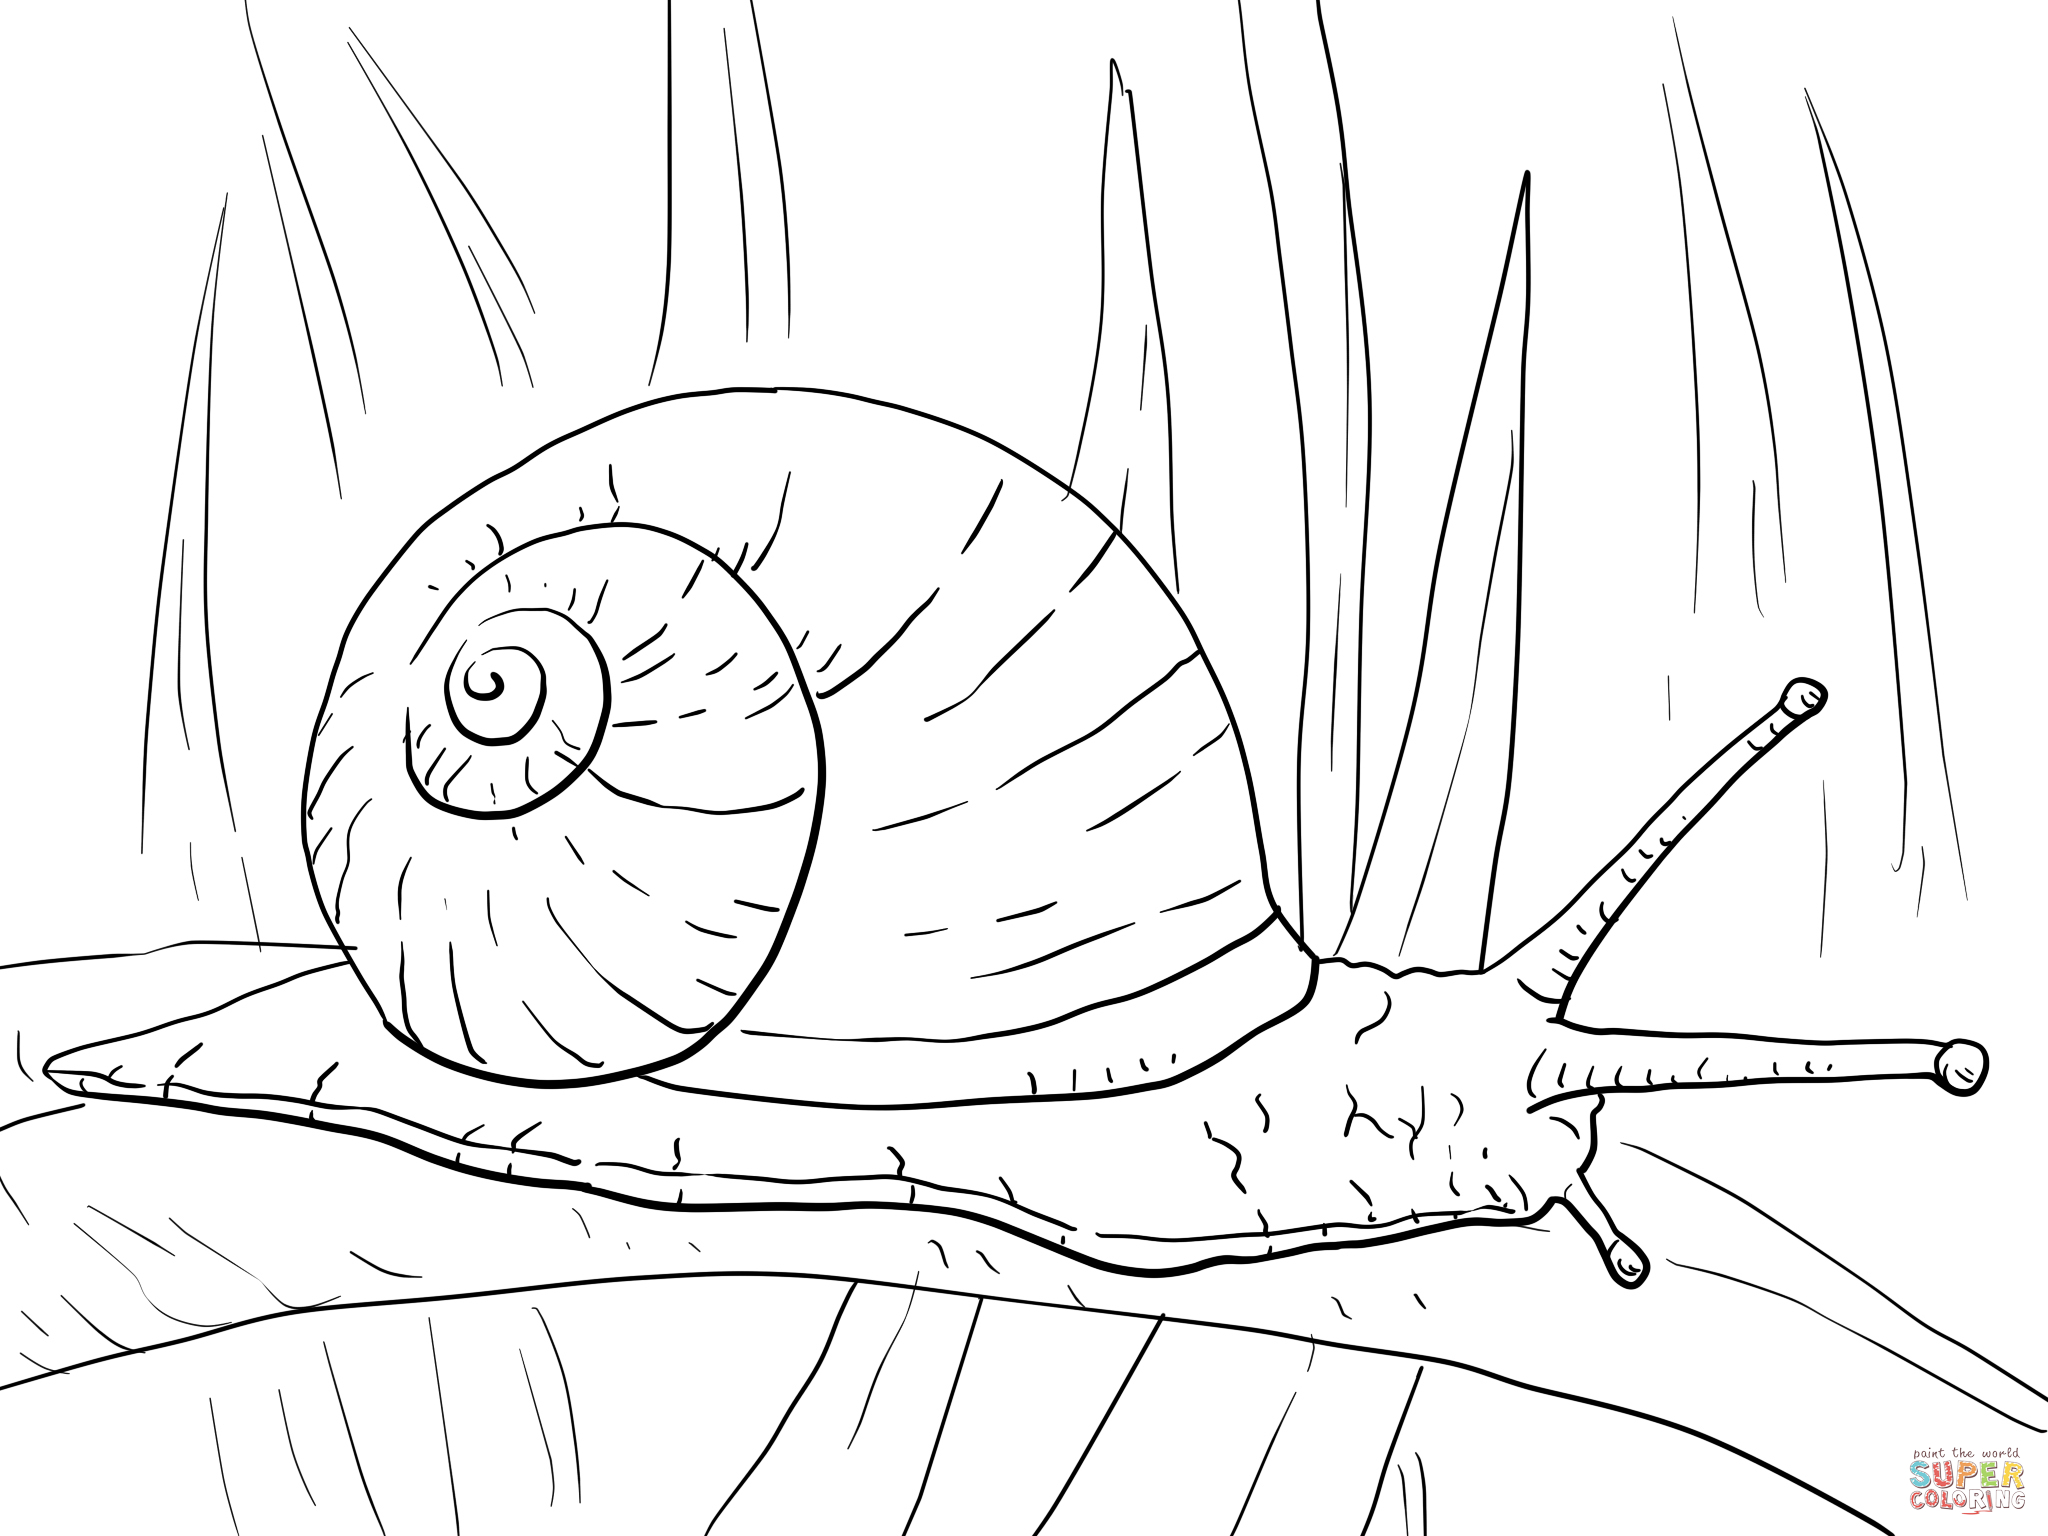 Garden Snail Coloring page | Free Printable Coloring Pages